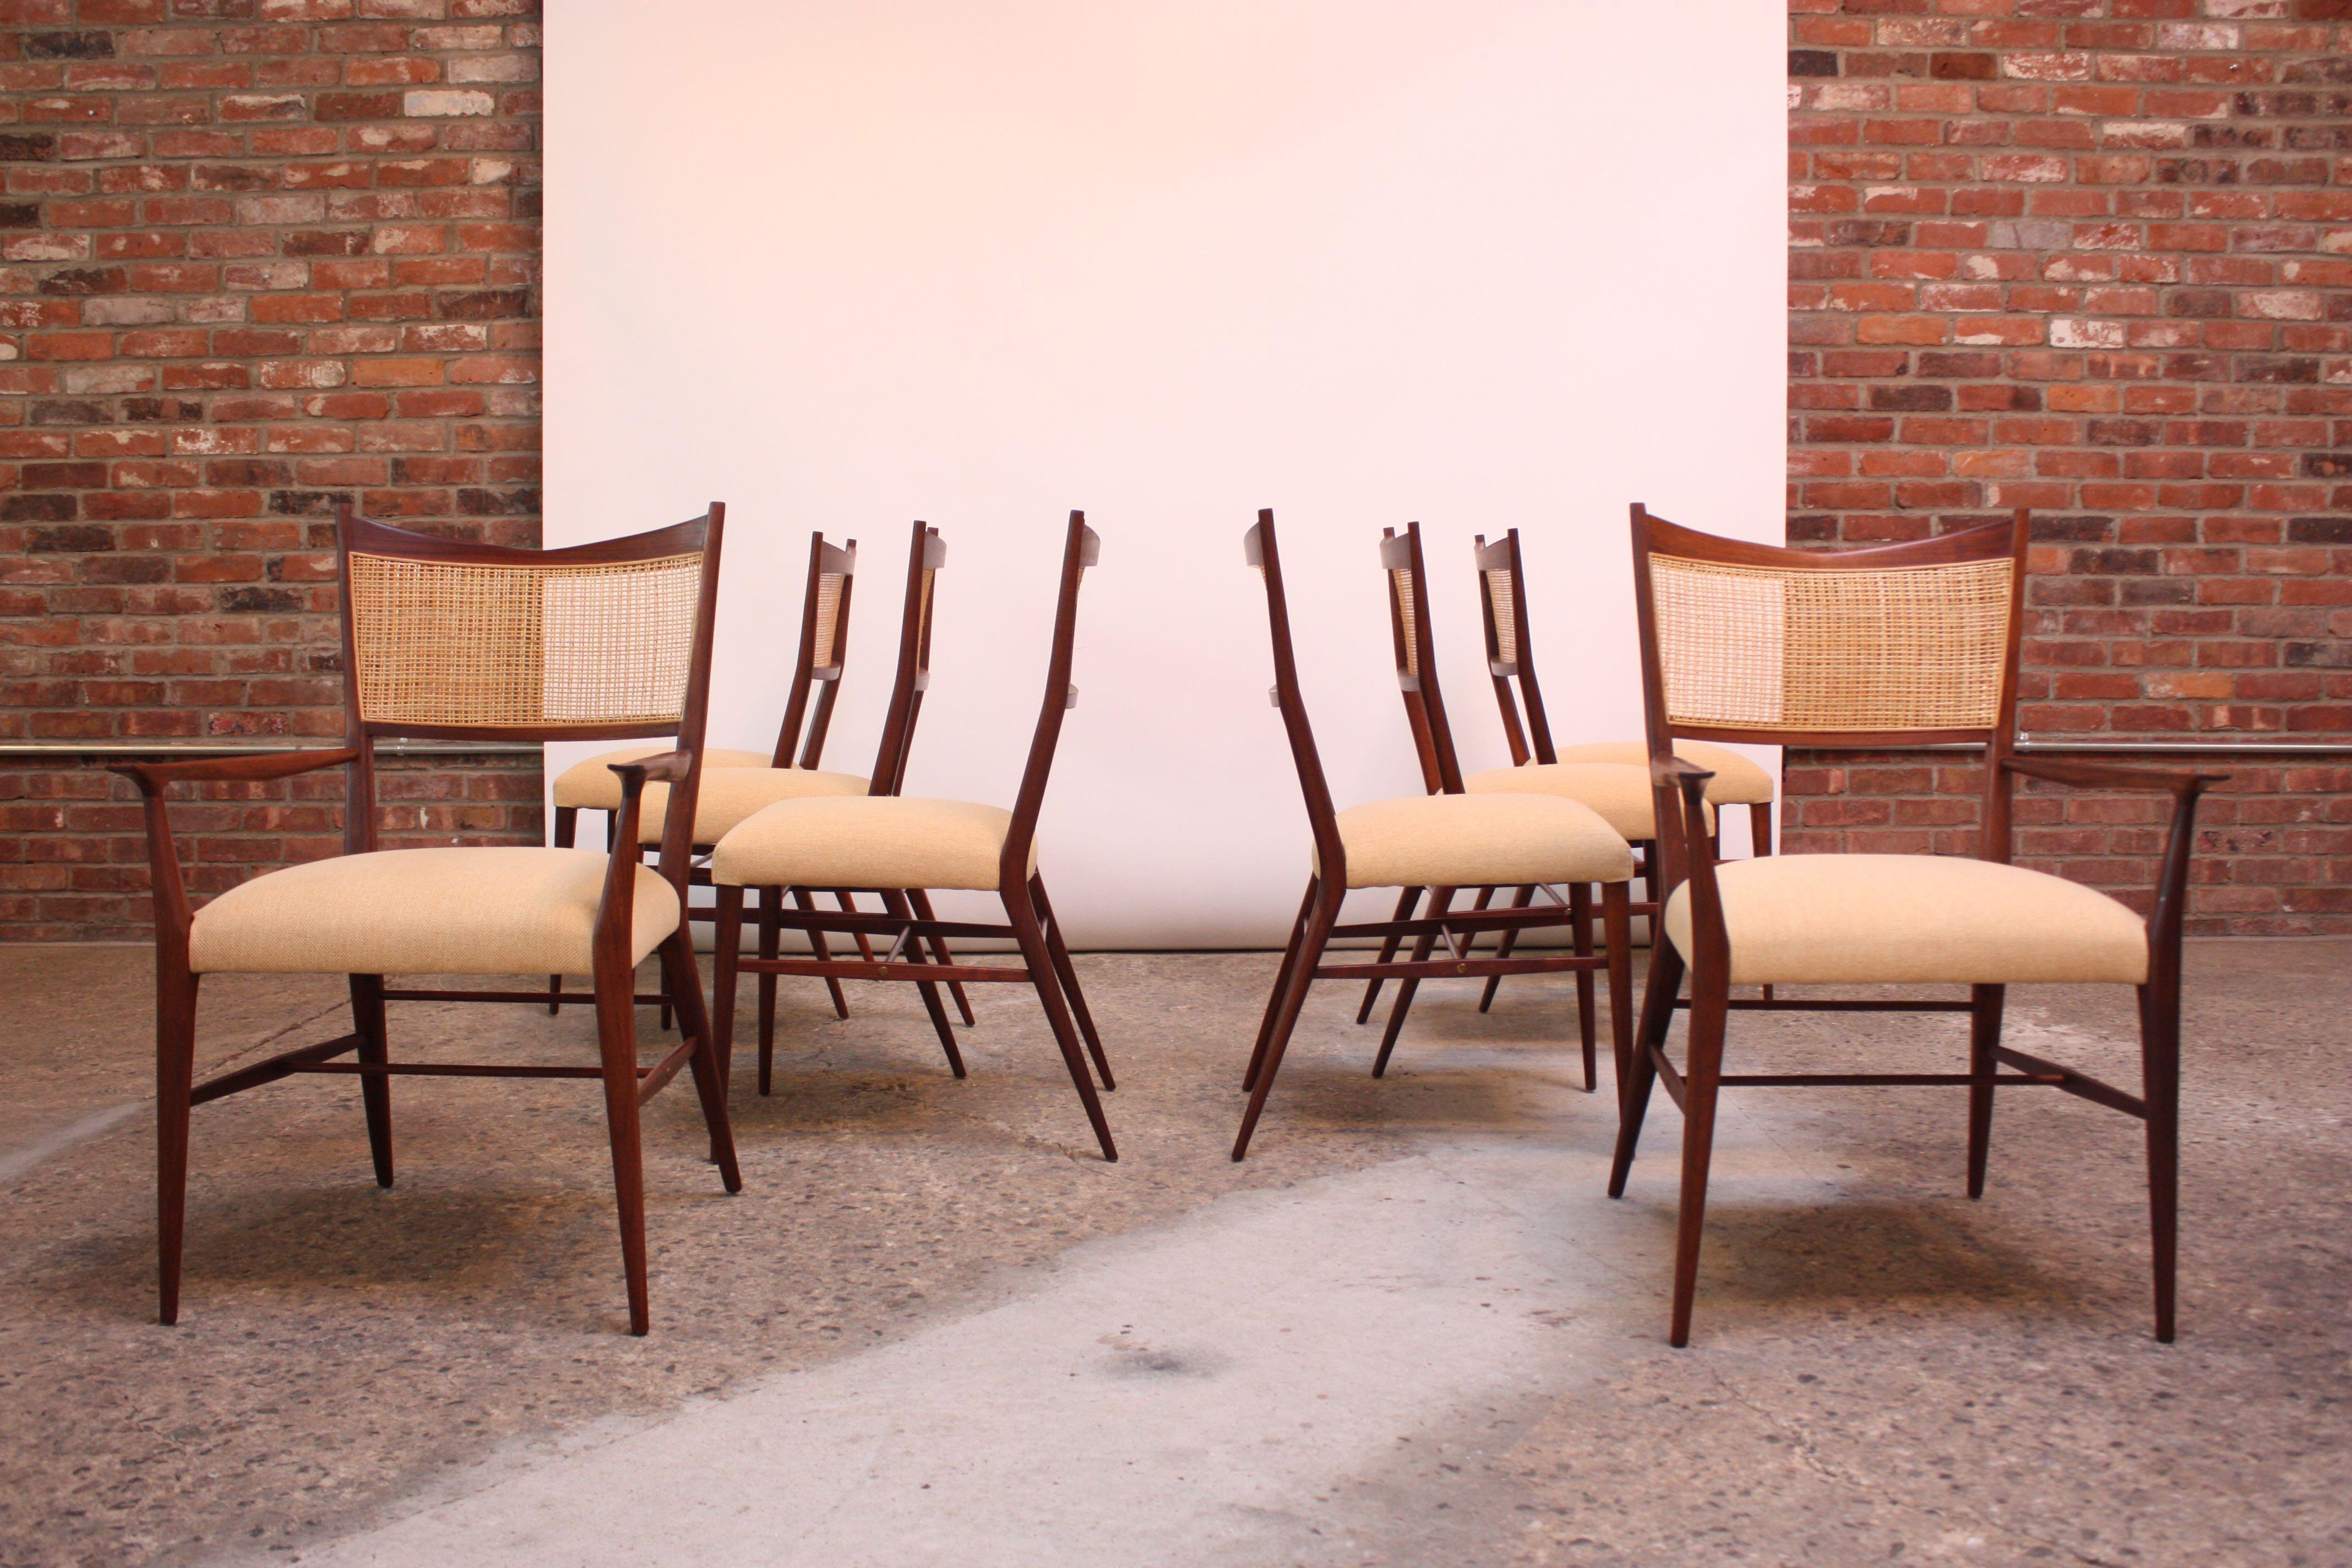 American Set of Eight Stained Mahogany and Cane Directional Dining Chairs by Paul McCobb